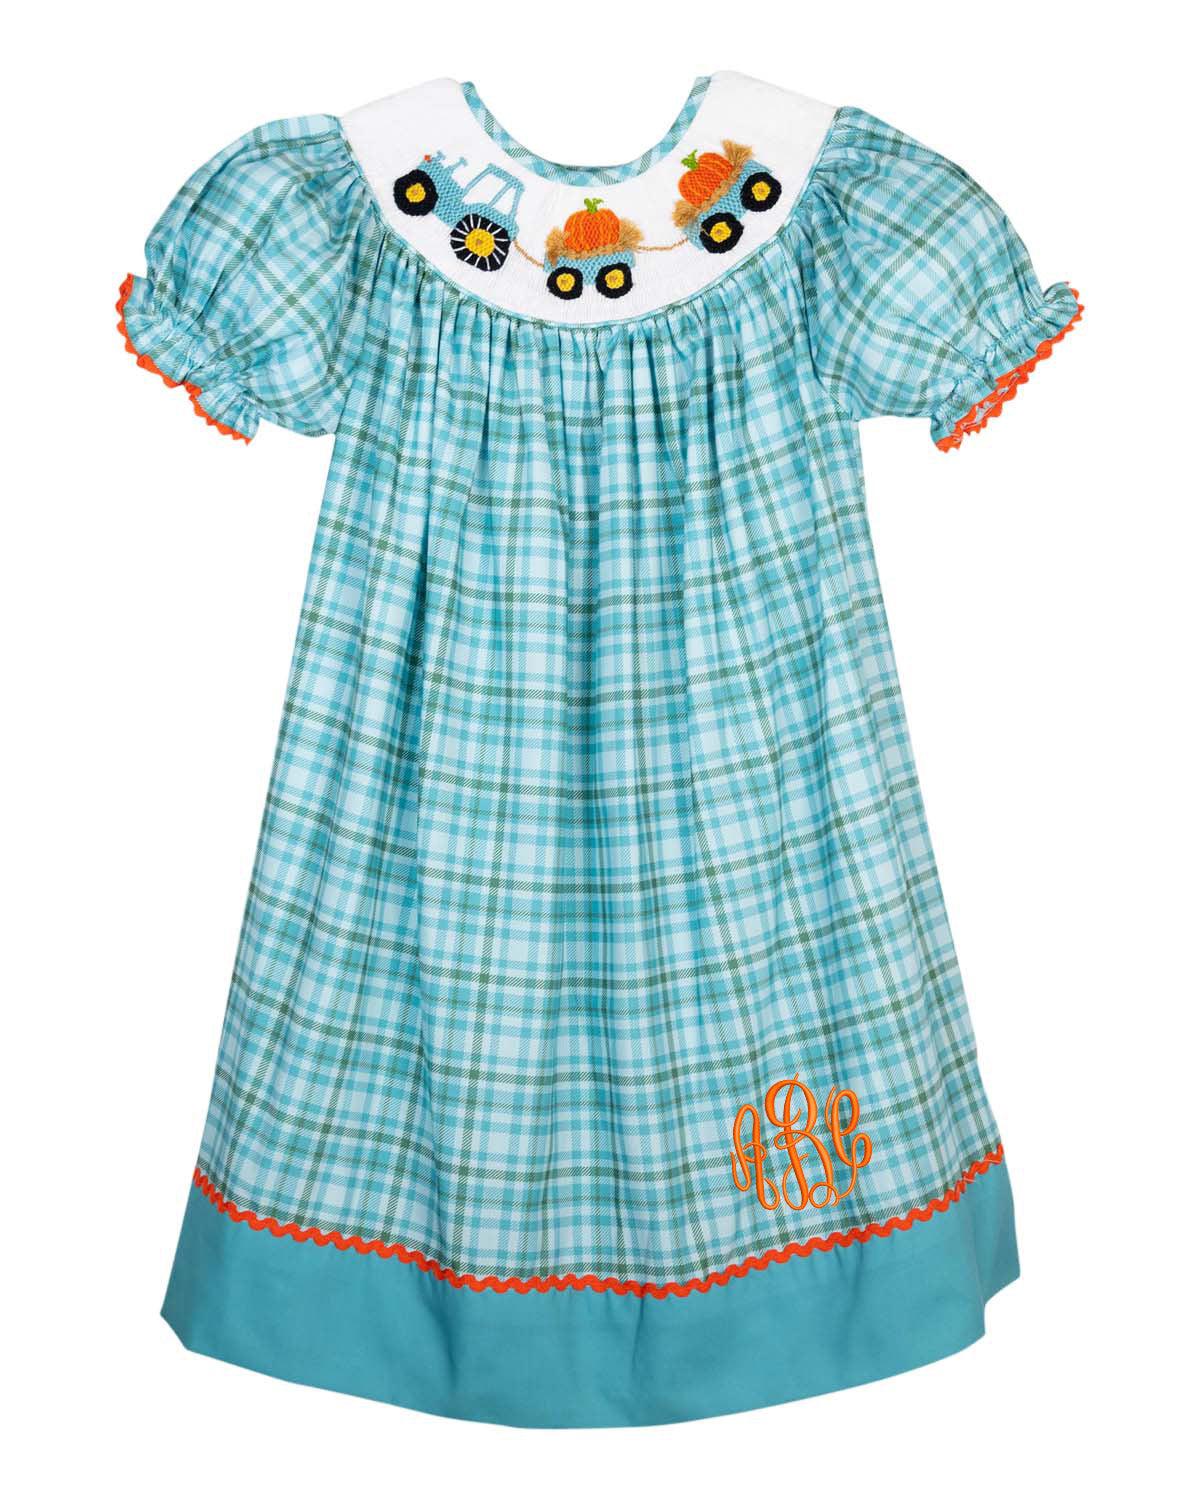 Tractor and Pumpkins Smocked Teal Plaid Dress-FINAL SALE